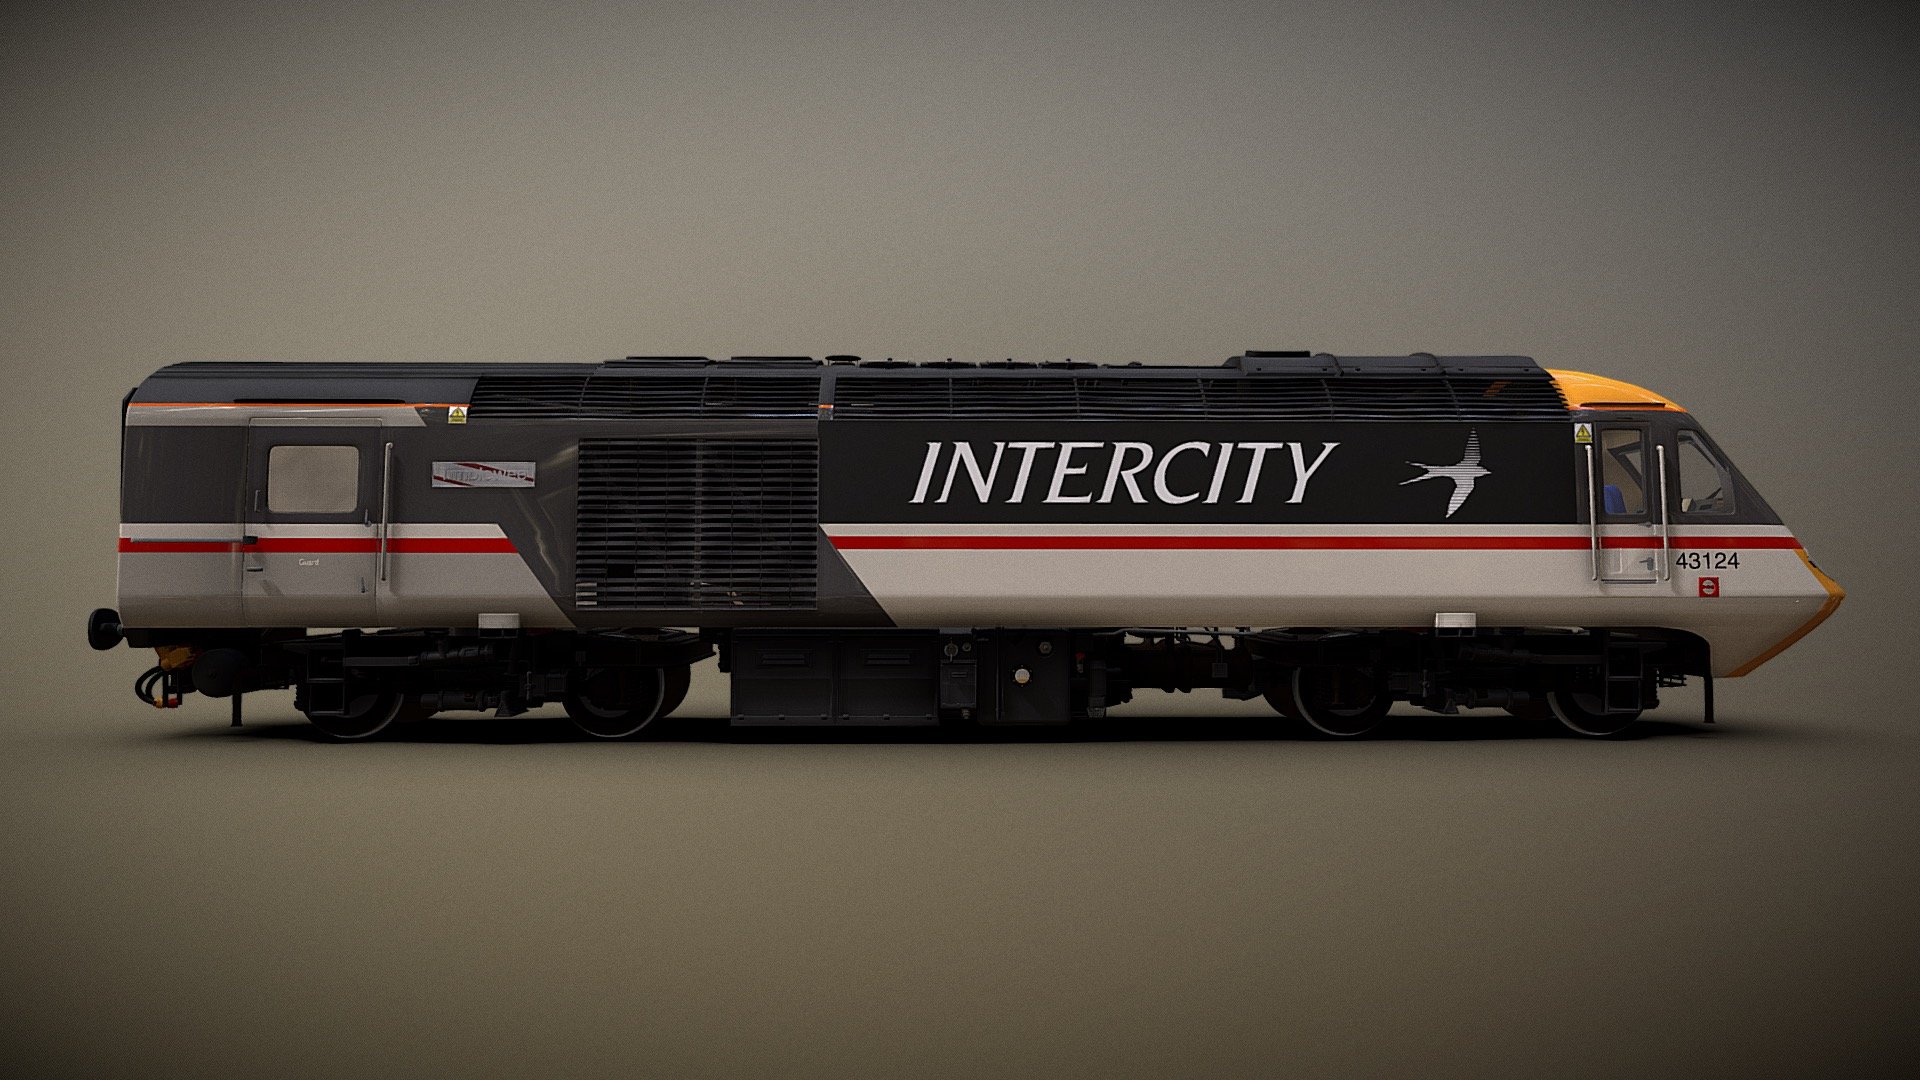 BR Class 43 Locomotive Power Car

Intercity Swallow Livery

Modelled in Blender 2.91

* This model is NOT presented as Game Ready *

The most amazing startup sound you will ever hear - Paxman Valenta Engine (See the video below of these beasts screaming to life @ 1:15)

https://youtu.be/1RgfyXZI_Bs - Train - Intercity 125 Swallow Livery - Download Free 3D model by timblewee 3d model